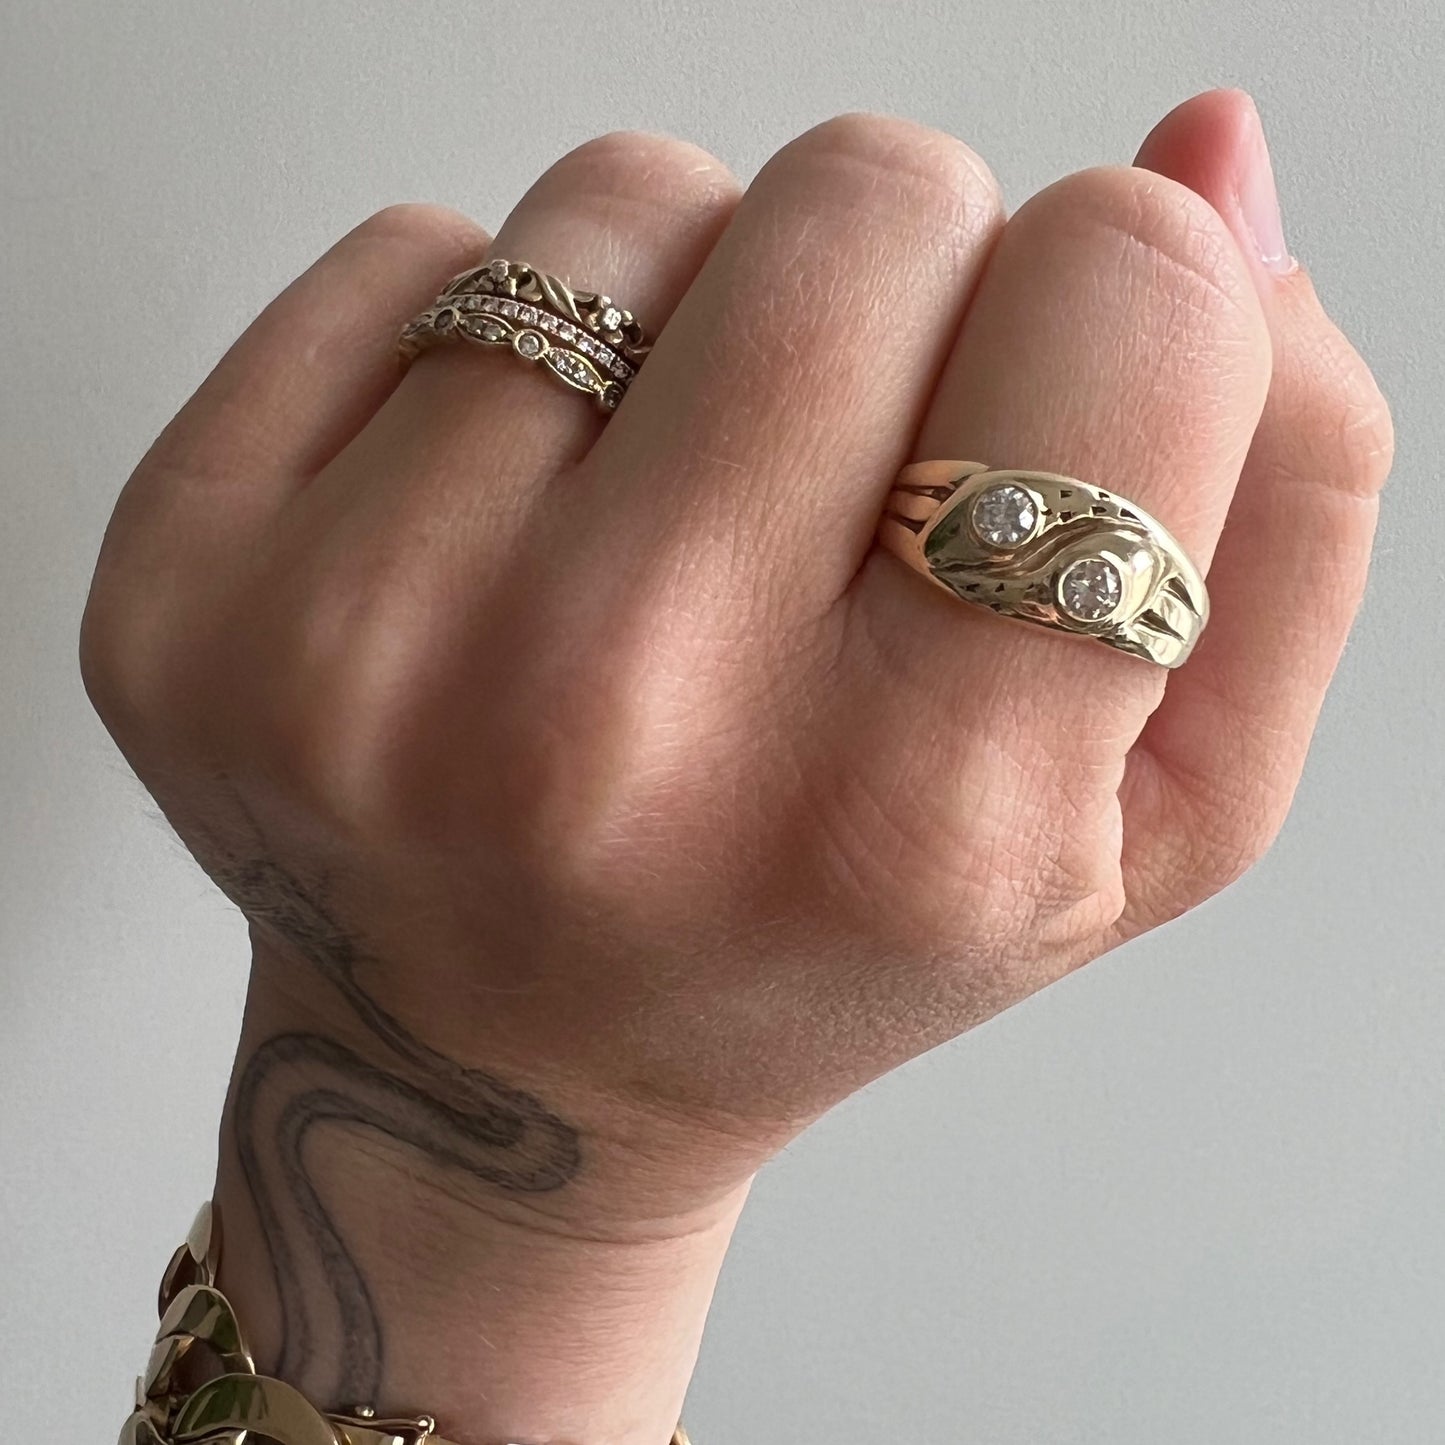 re-worked V I N T A G E // serpent stacker / 9k yellow gold and diamond double snake ring / size 9.25